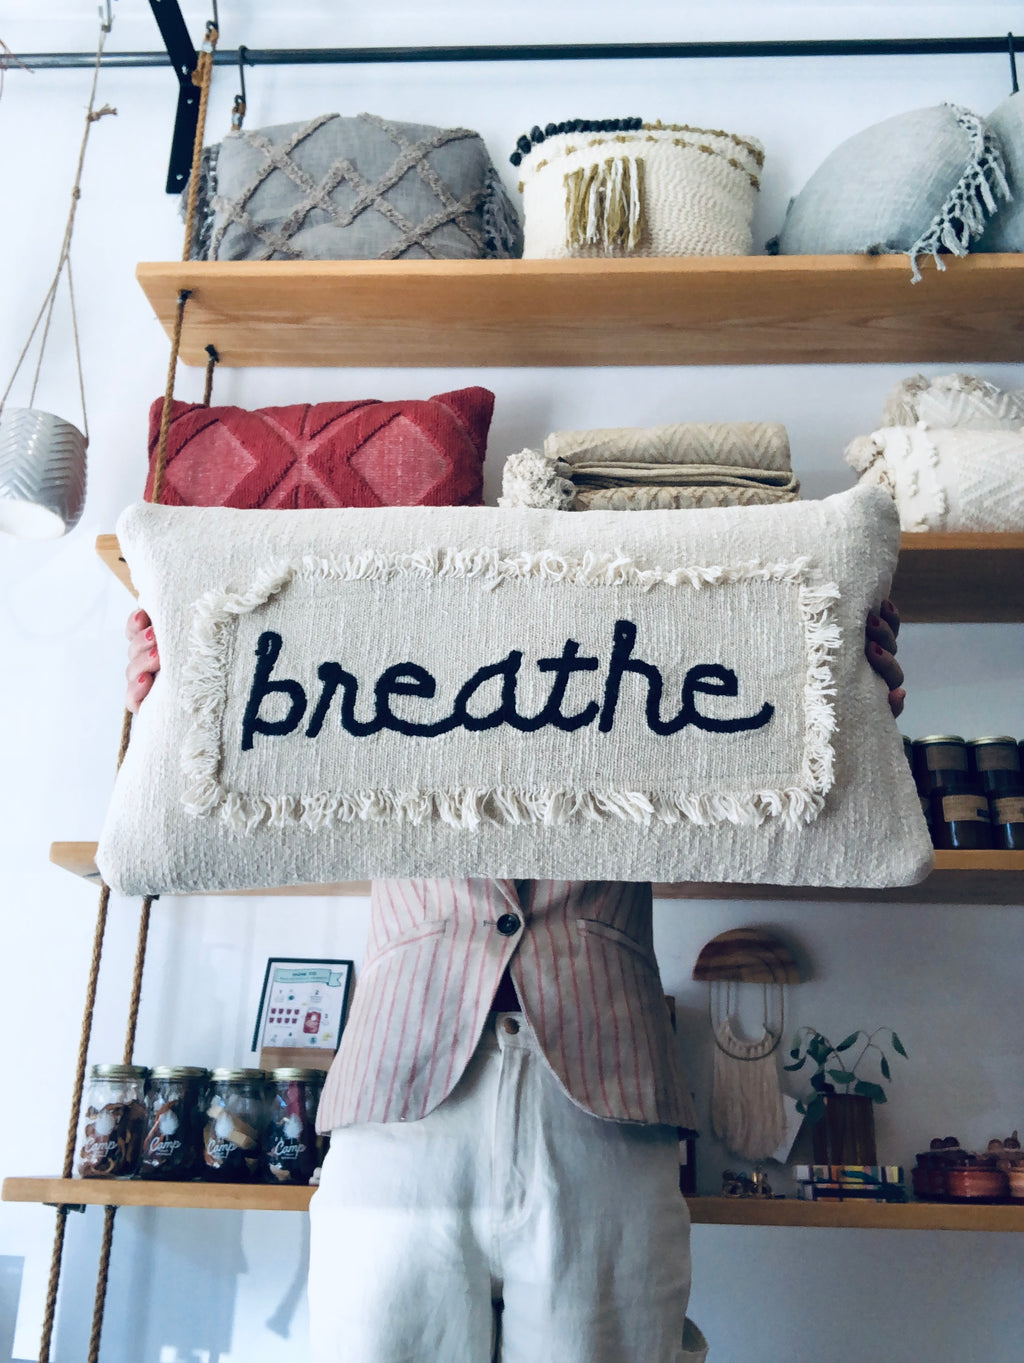 Just Breathe Pillow